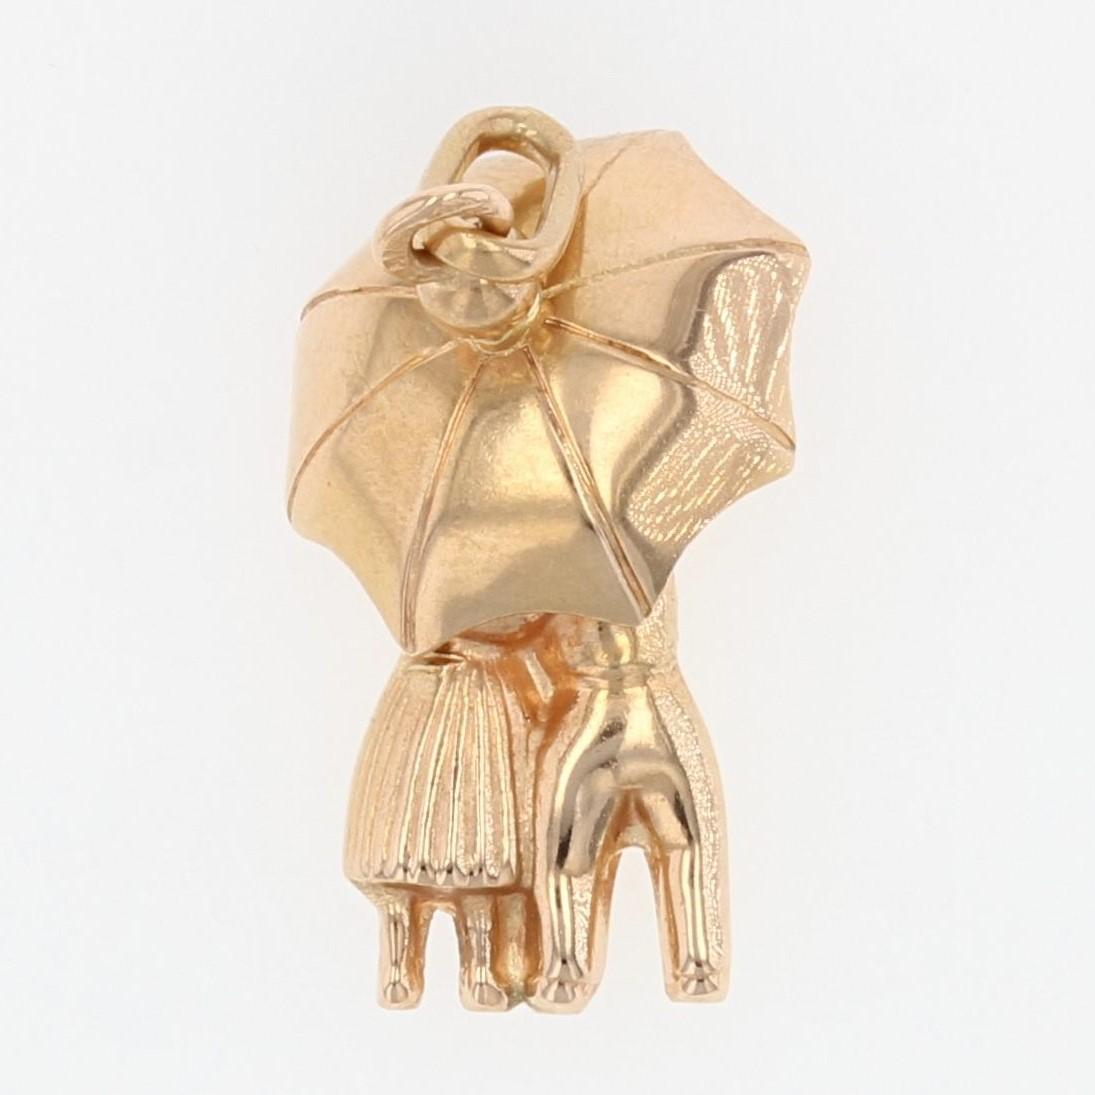 Pendant in 18 karat rose gold, eagle head hallmark.
Romantic, this gold pendant represents a couple embracing under an umbrella.
Pendant sold alone without its chain of presentation.
Height : 2,3 cm, width : 11,7 mm approximately, thickness : 5,6 mm